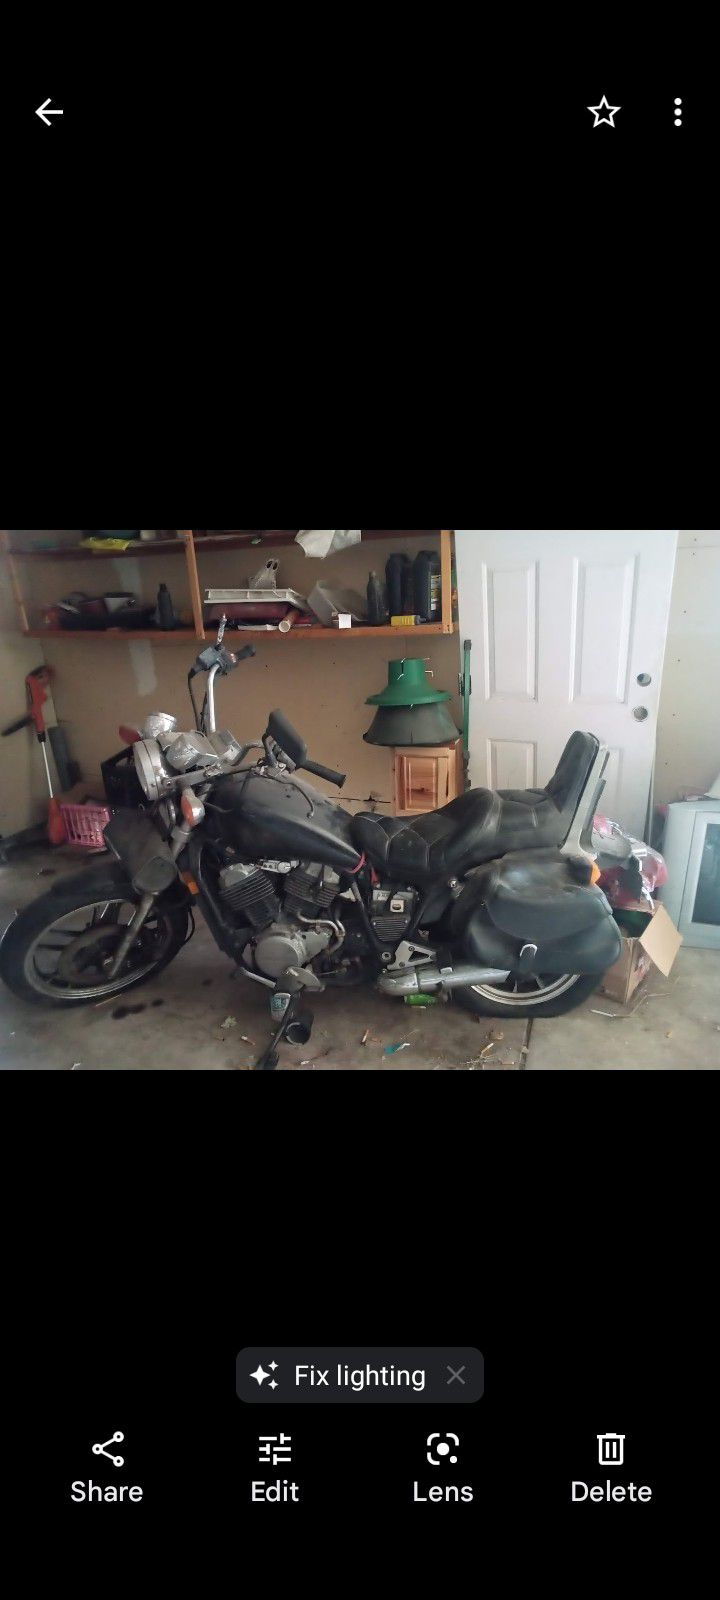 Honda Shadow 500 It has 24958 Miles On It. It's a Project Bike it comes with 4 saddle bags and I am asking for 500